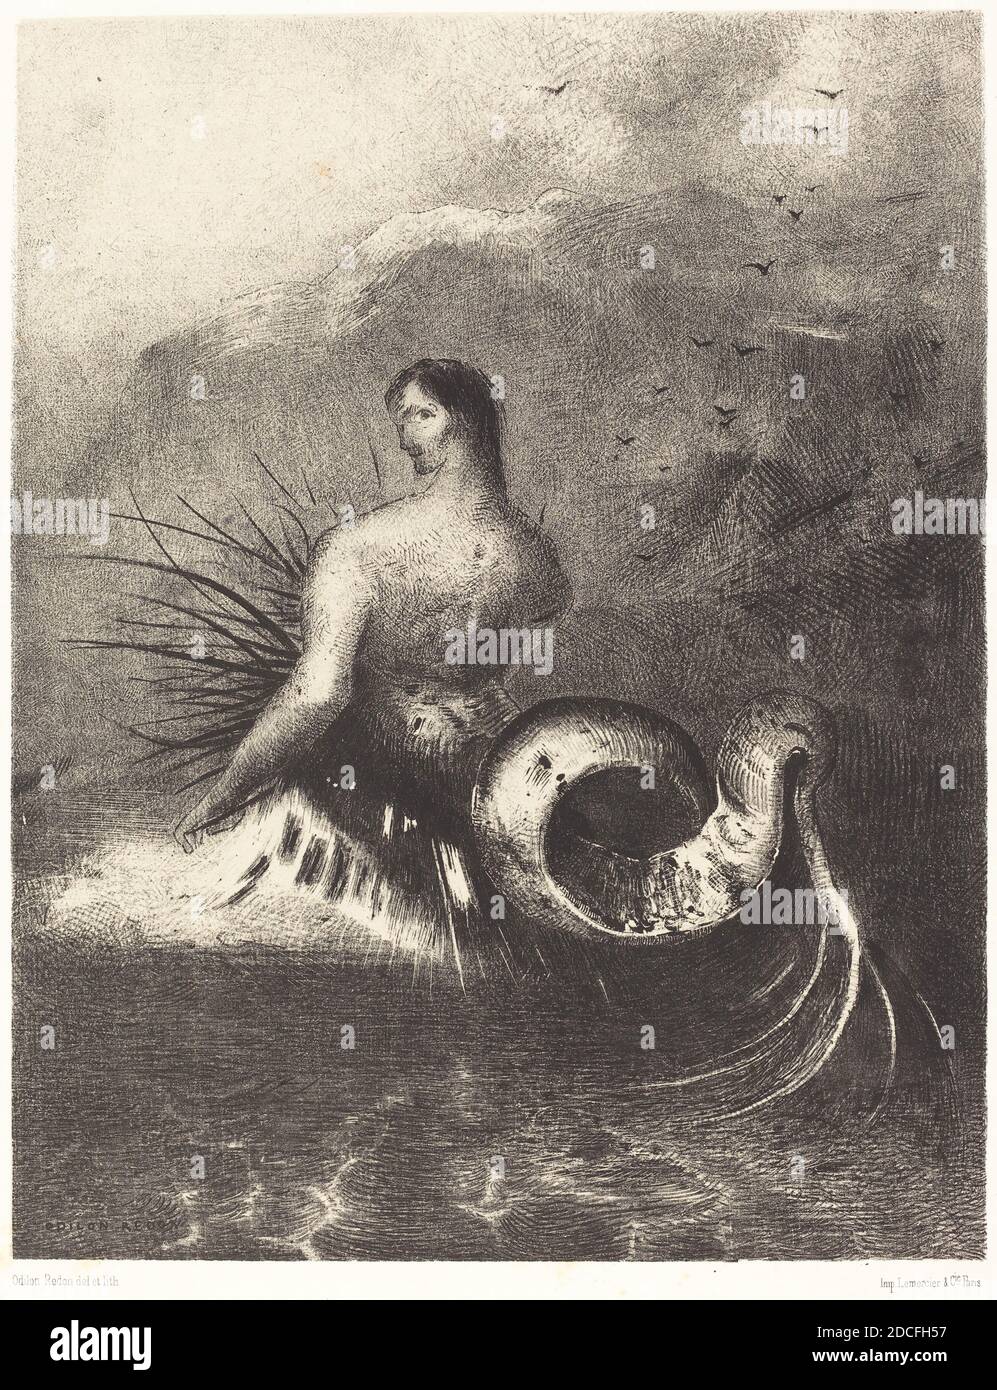 Odilon Redon, (artist), French, 1840 - 1916, La sirene sortit des flots vetue de dards (The Siren clothed in barbs, emerged from the waves, Les Origines, (series), 1883, lithograph, image: 30.1 x 23.5 cm (11 7/8 x 9 1/4 in.), sheet: 55 x 35.8 cm (21 5/8 x 14 1/8 in Stock Photo